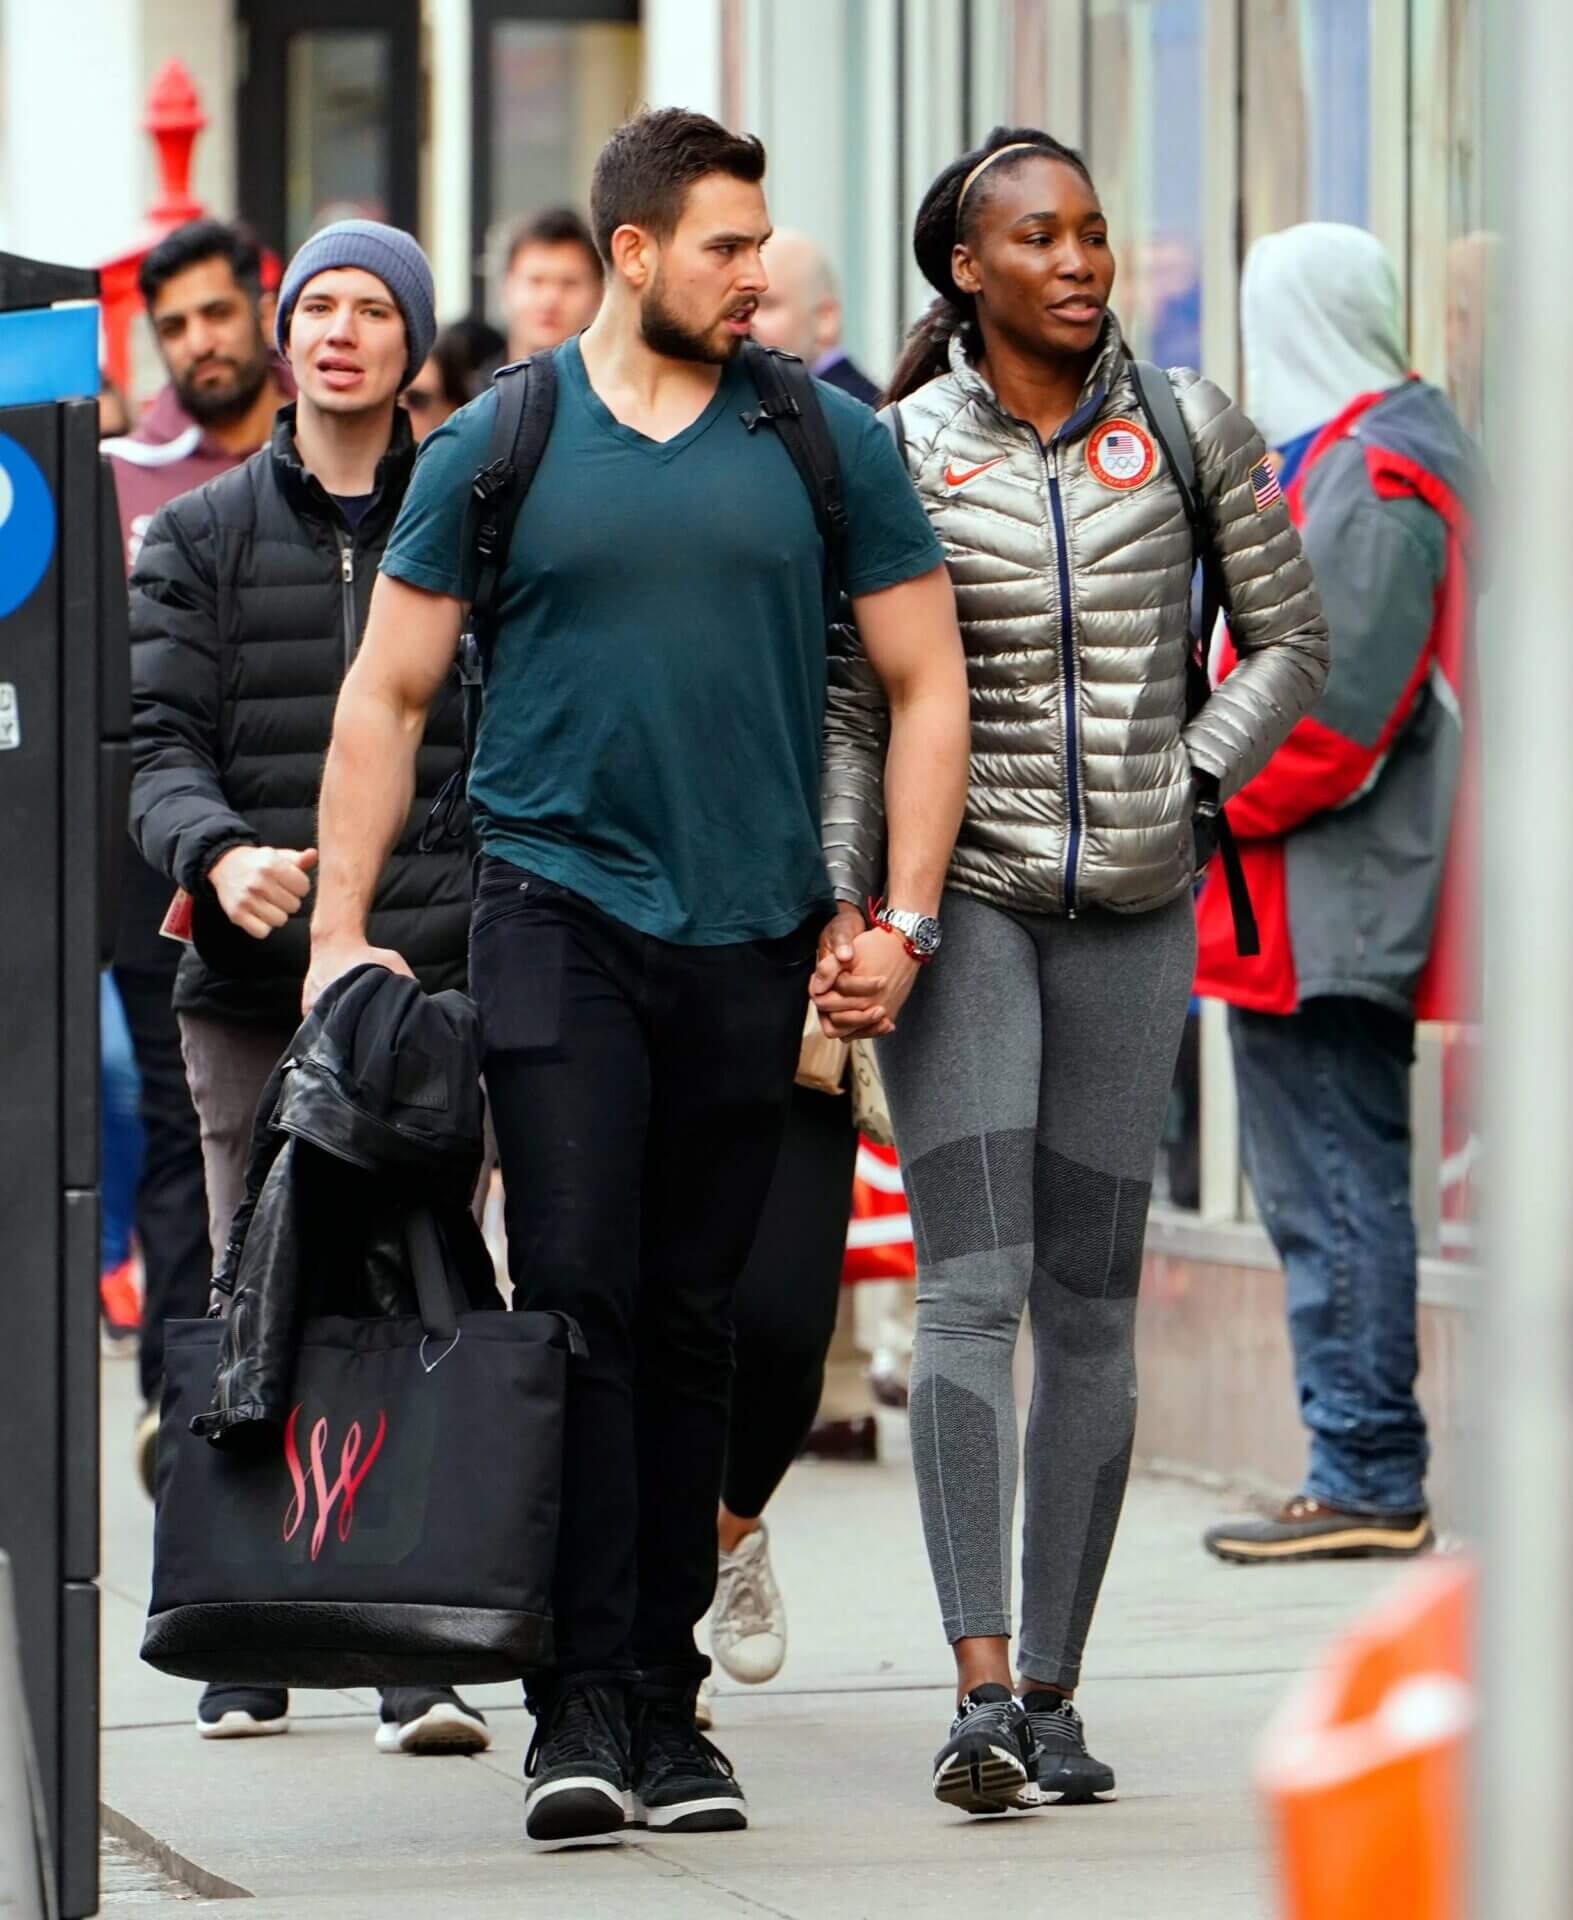 Who-Is-Venus-Williams-Dating-Currently-Full-Details!